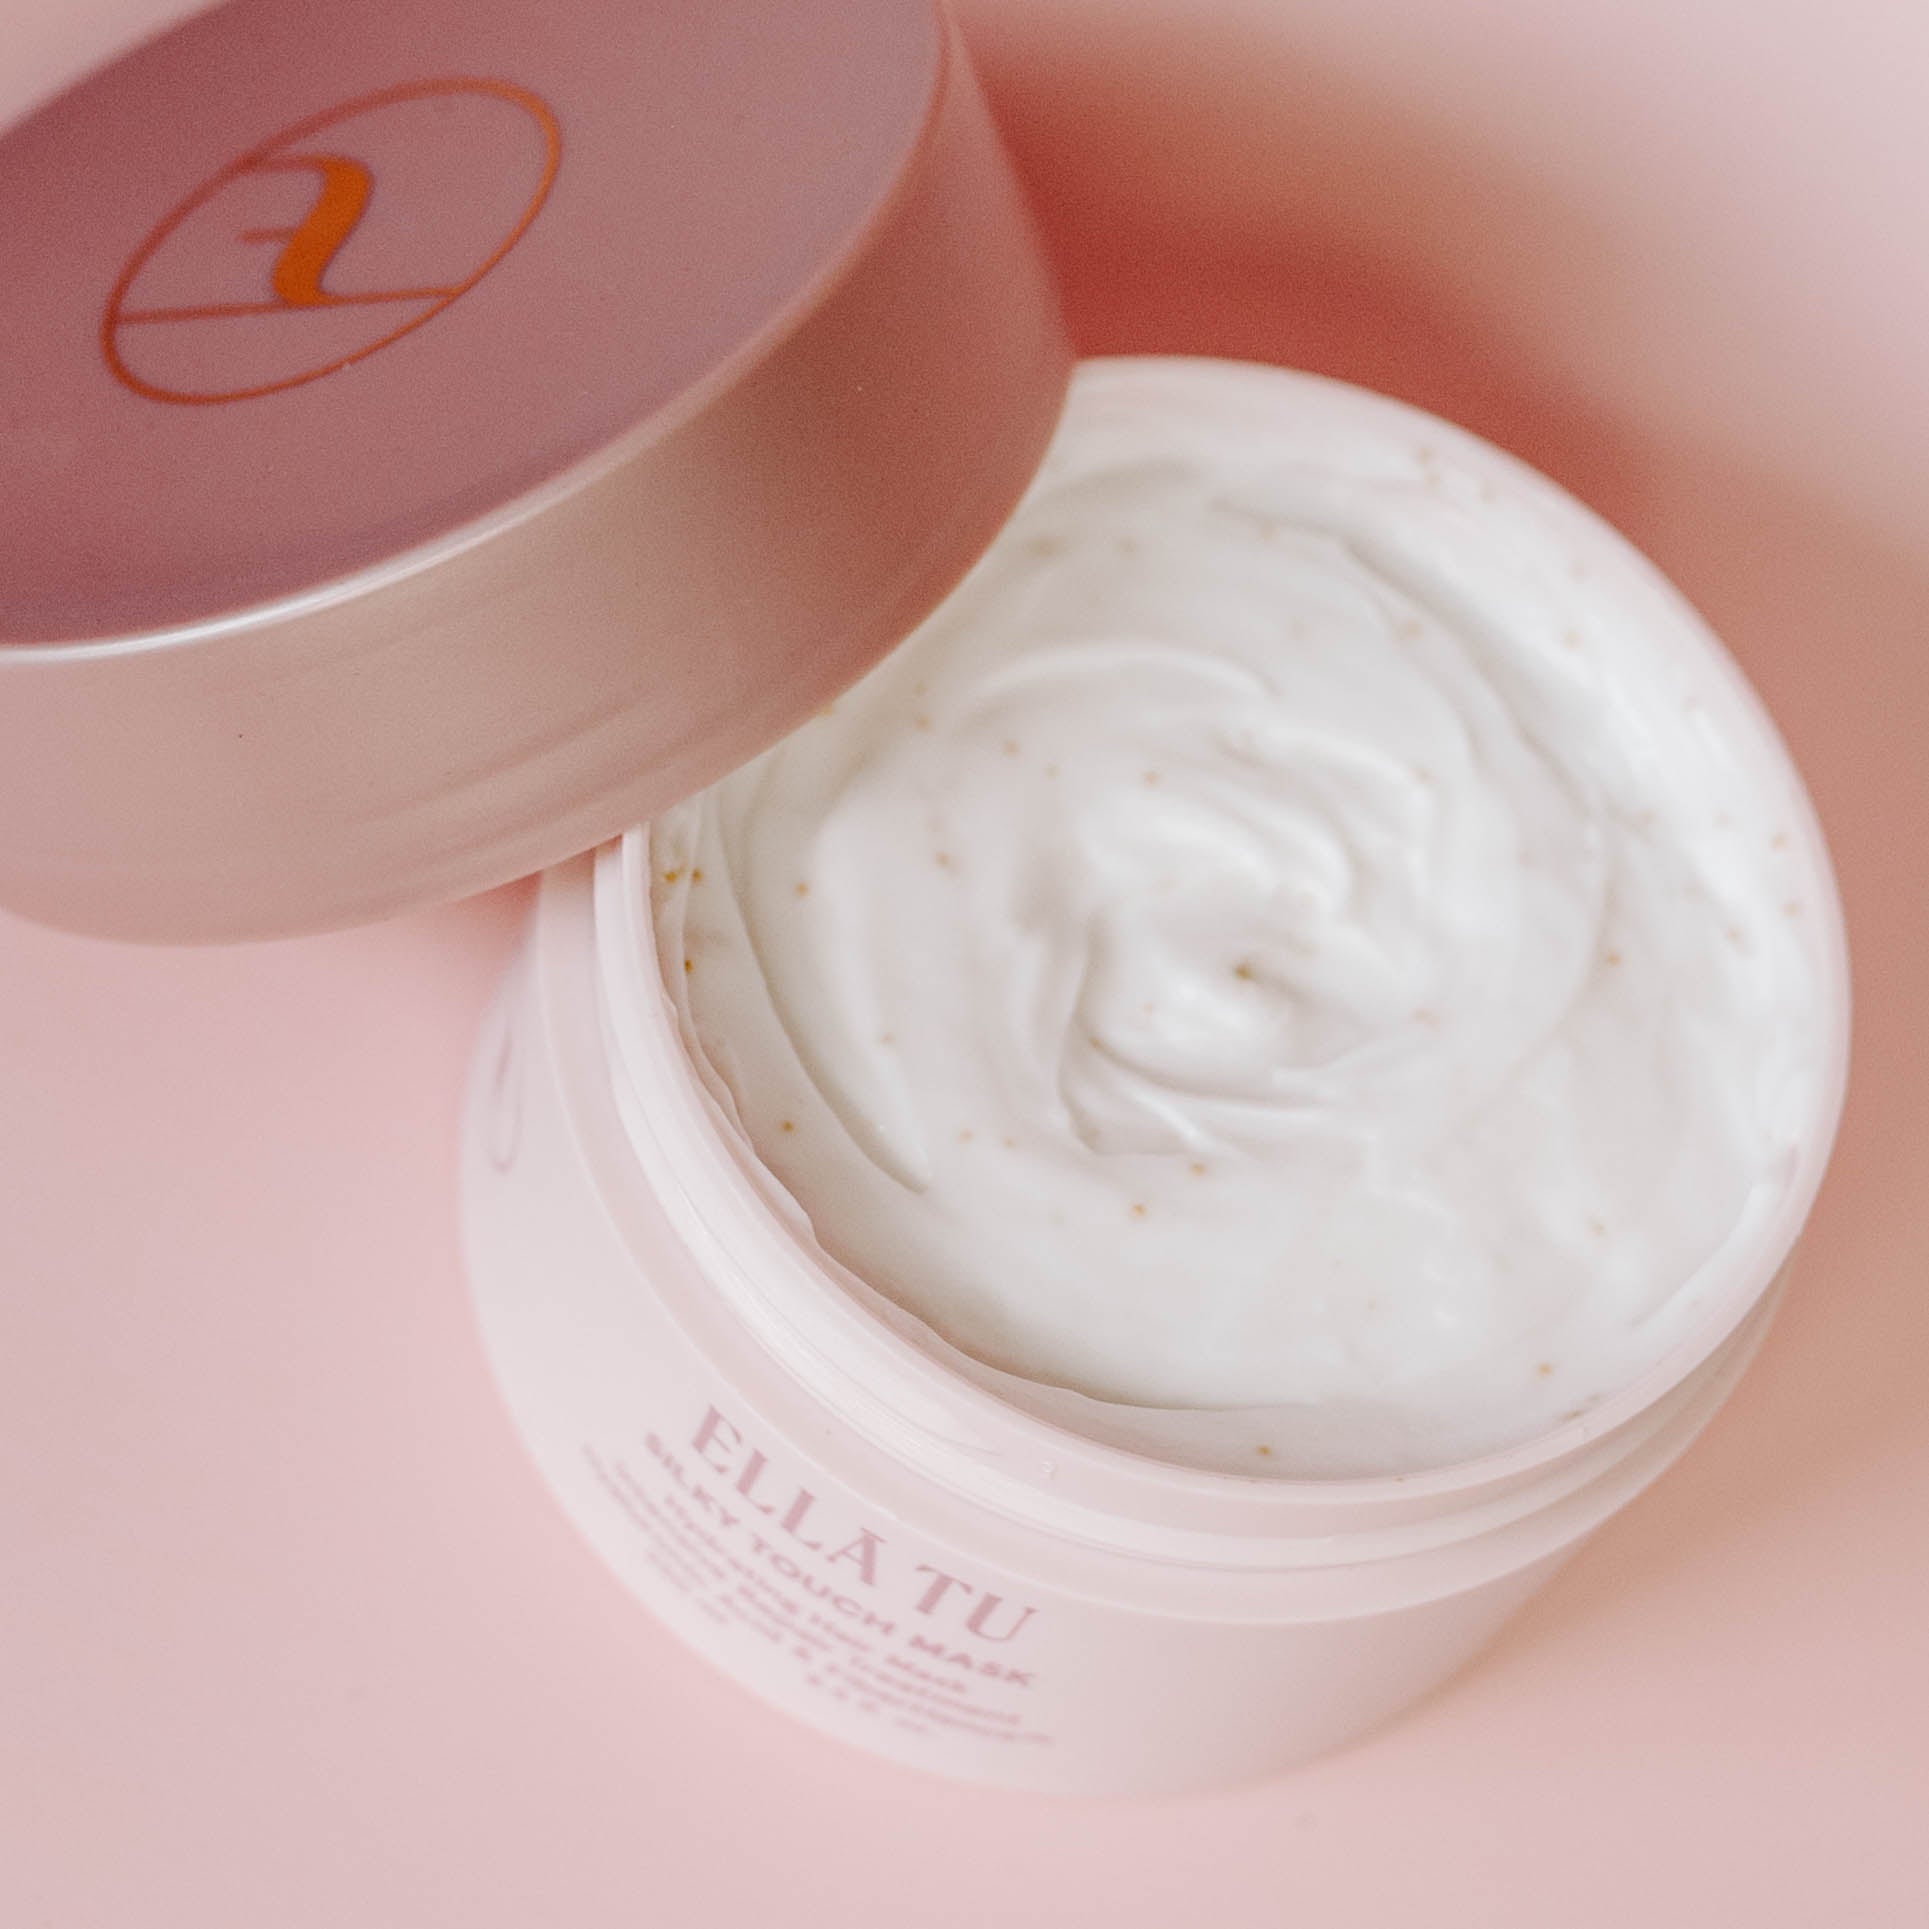 The Ellātu Silky Touch Hair Mask is enriched with Vitamin E to prevent dull and frizzy hair.